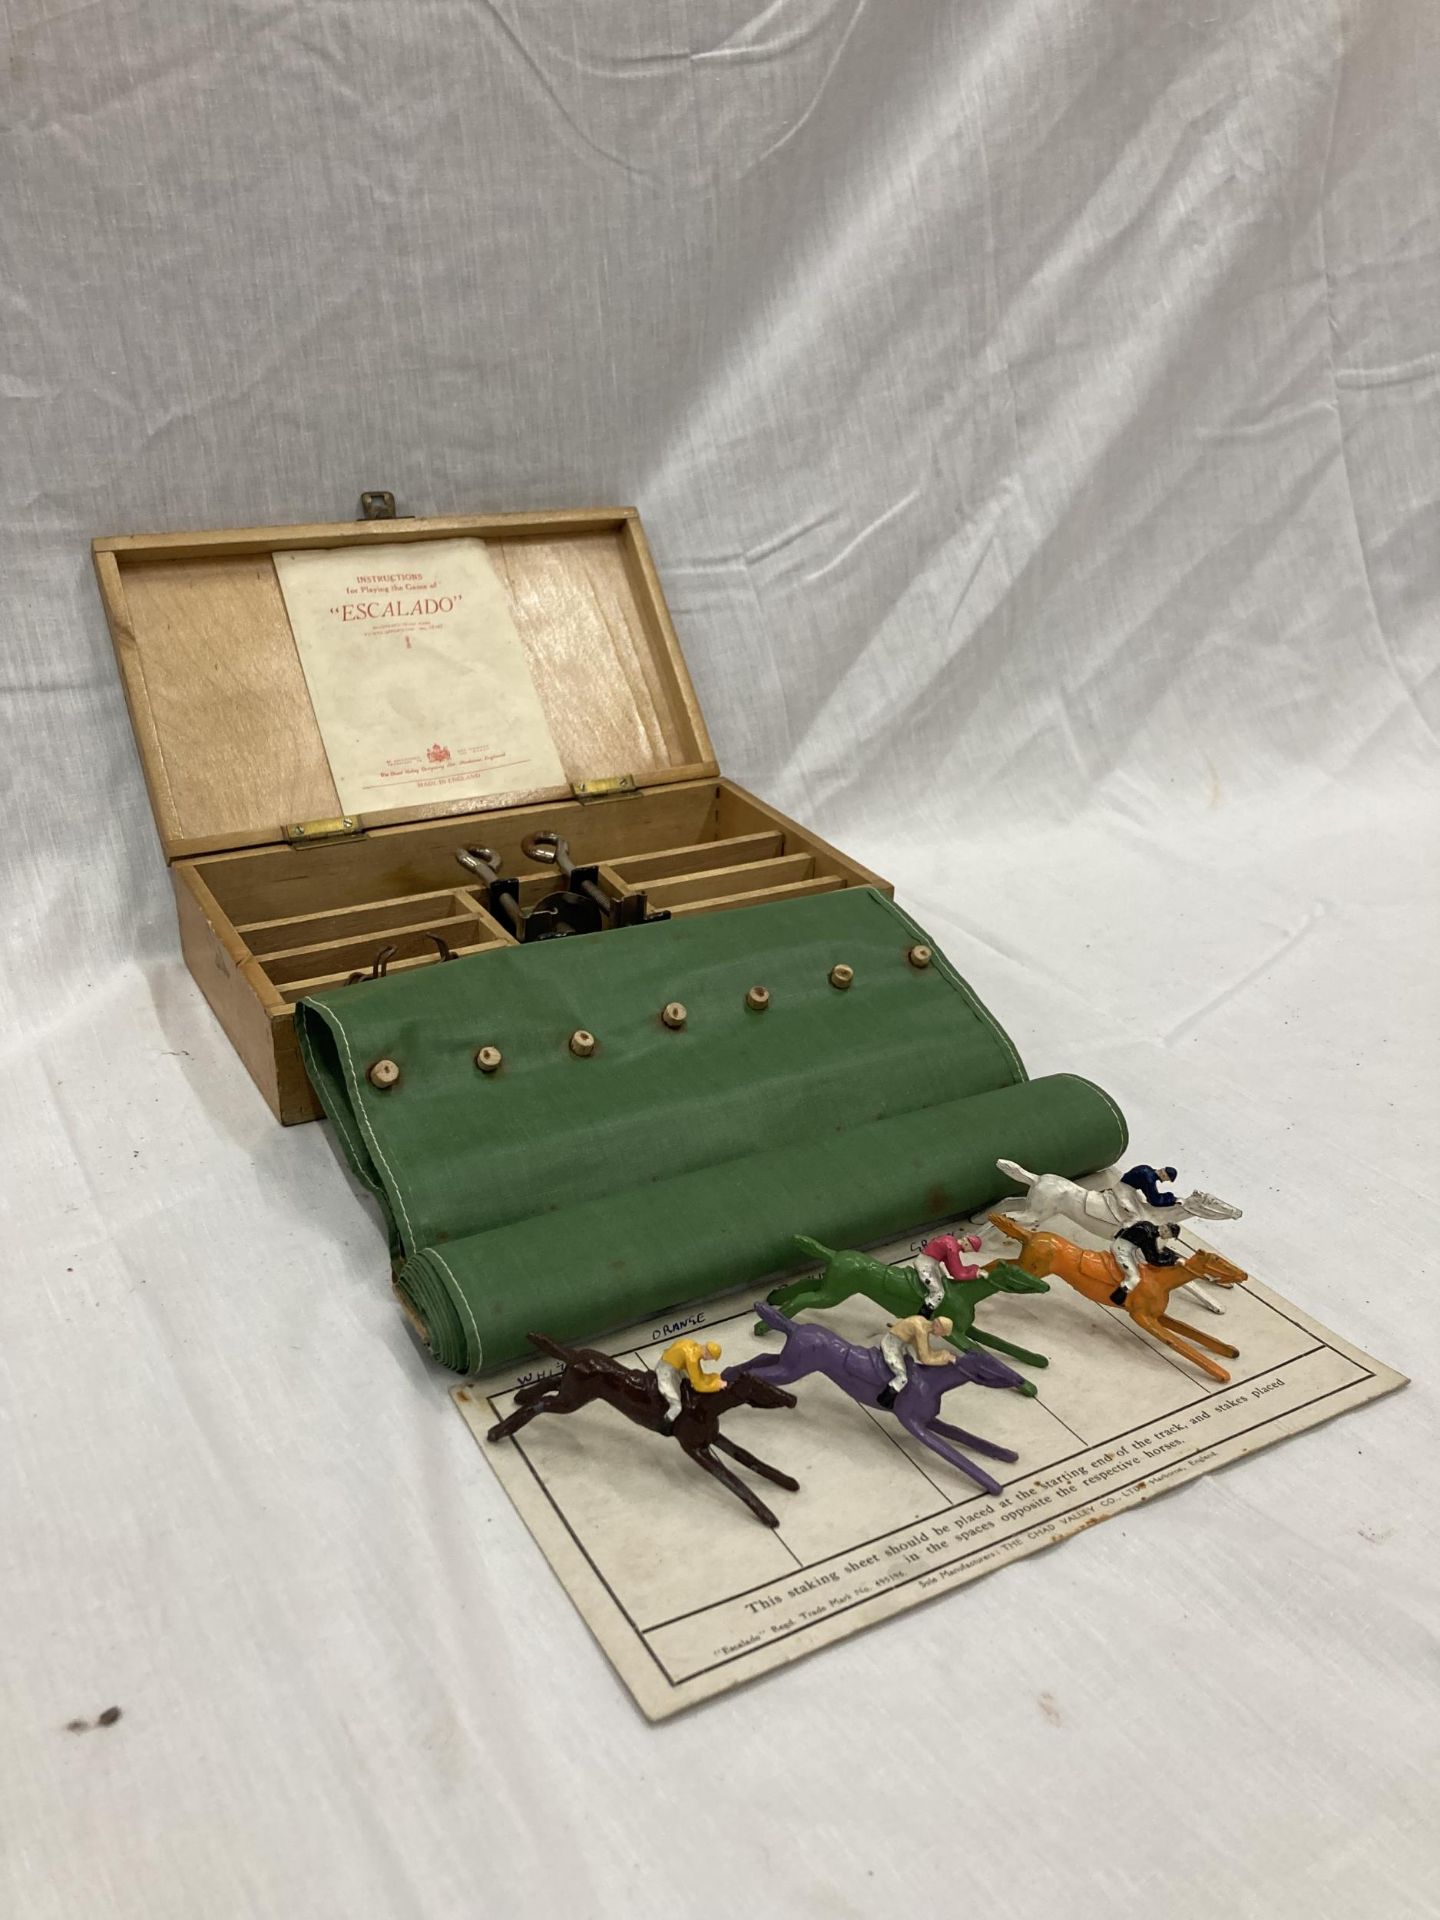 A VINTAGE BOXED ESCALADO GAME WITH INSTRUCTIONS AND A STAKING SHEET - Image 3 of 8